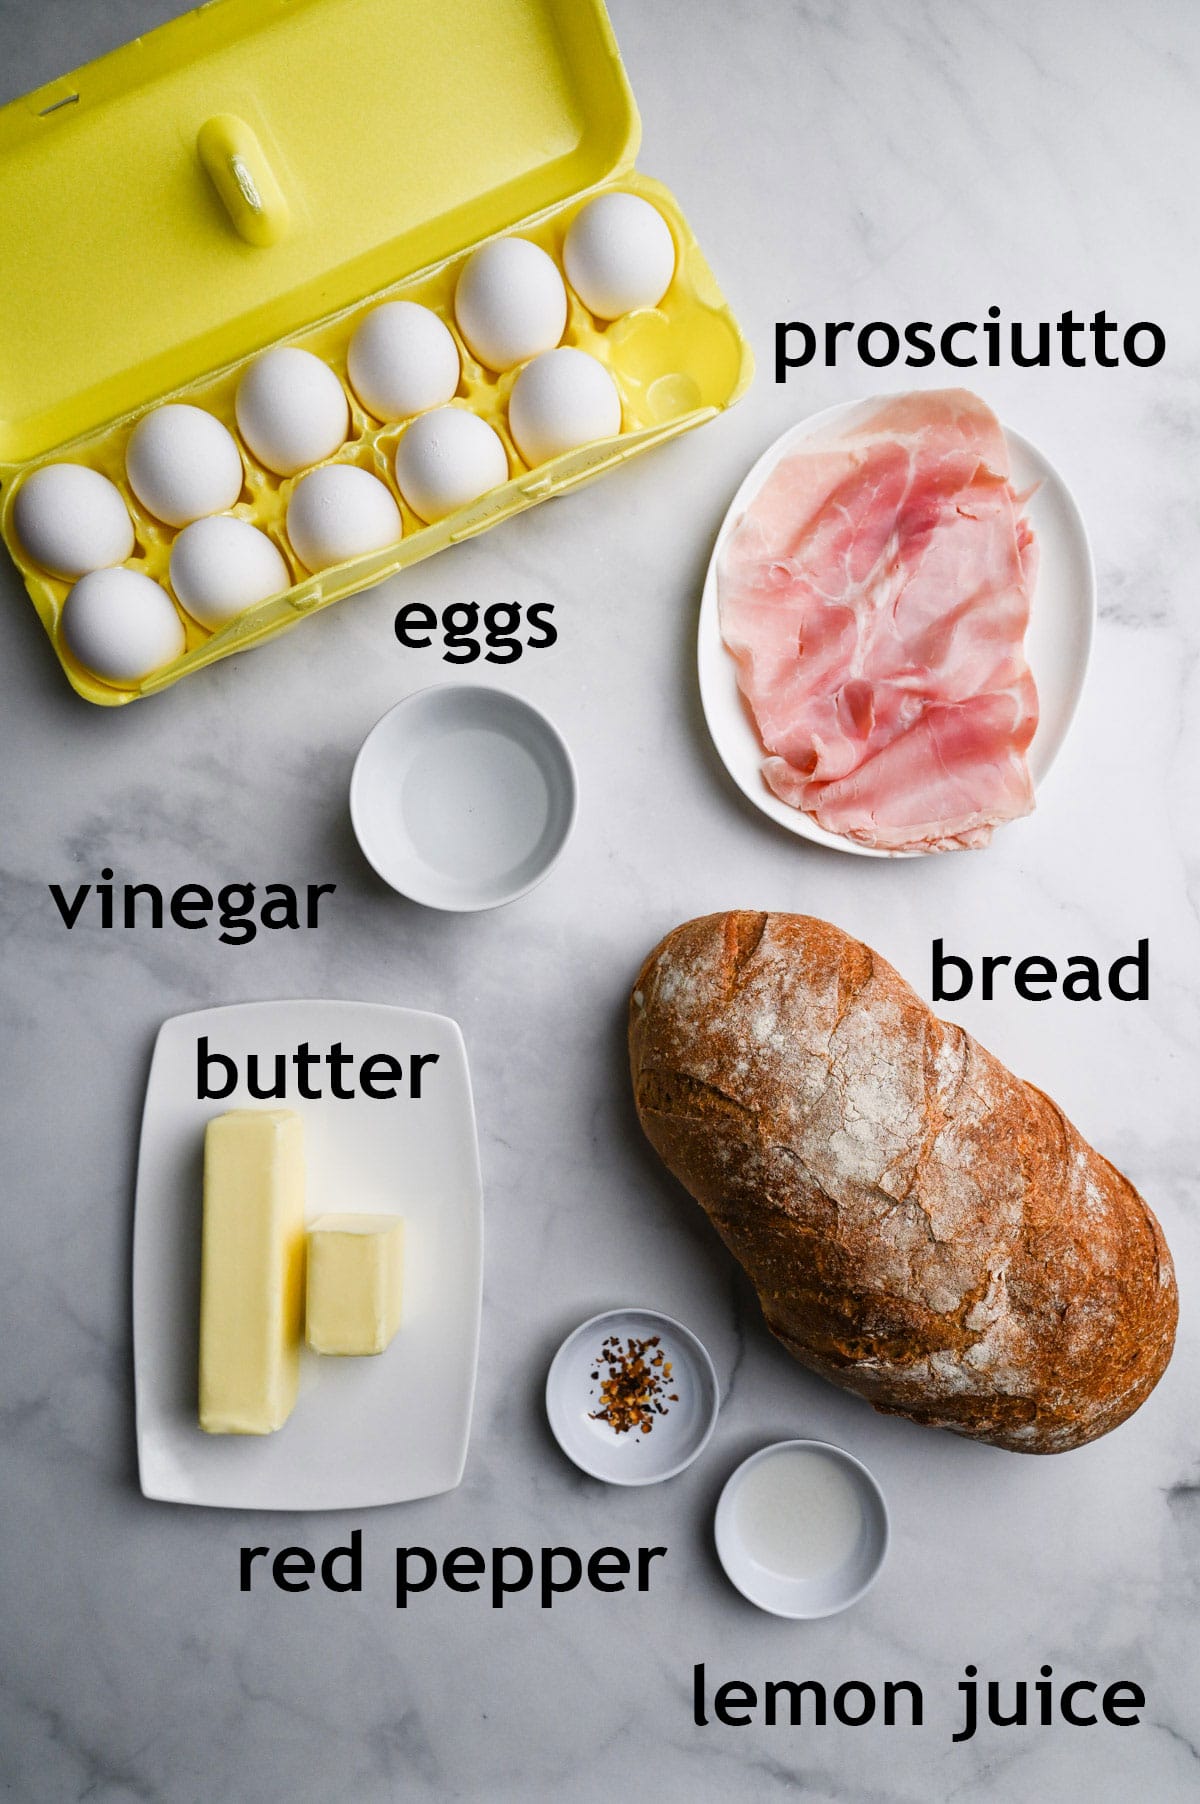 Ingredients including eggs, prosciutto ham, bread, butter, red pepper, lemon juice and white vinegar.